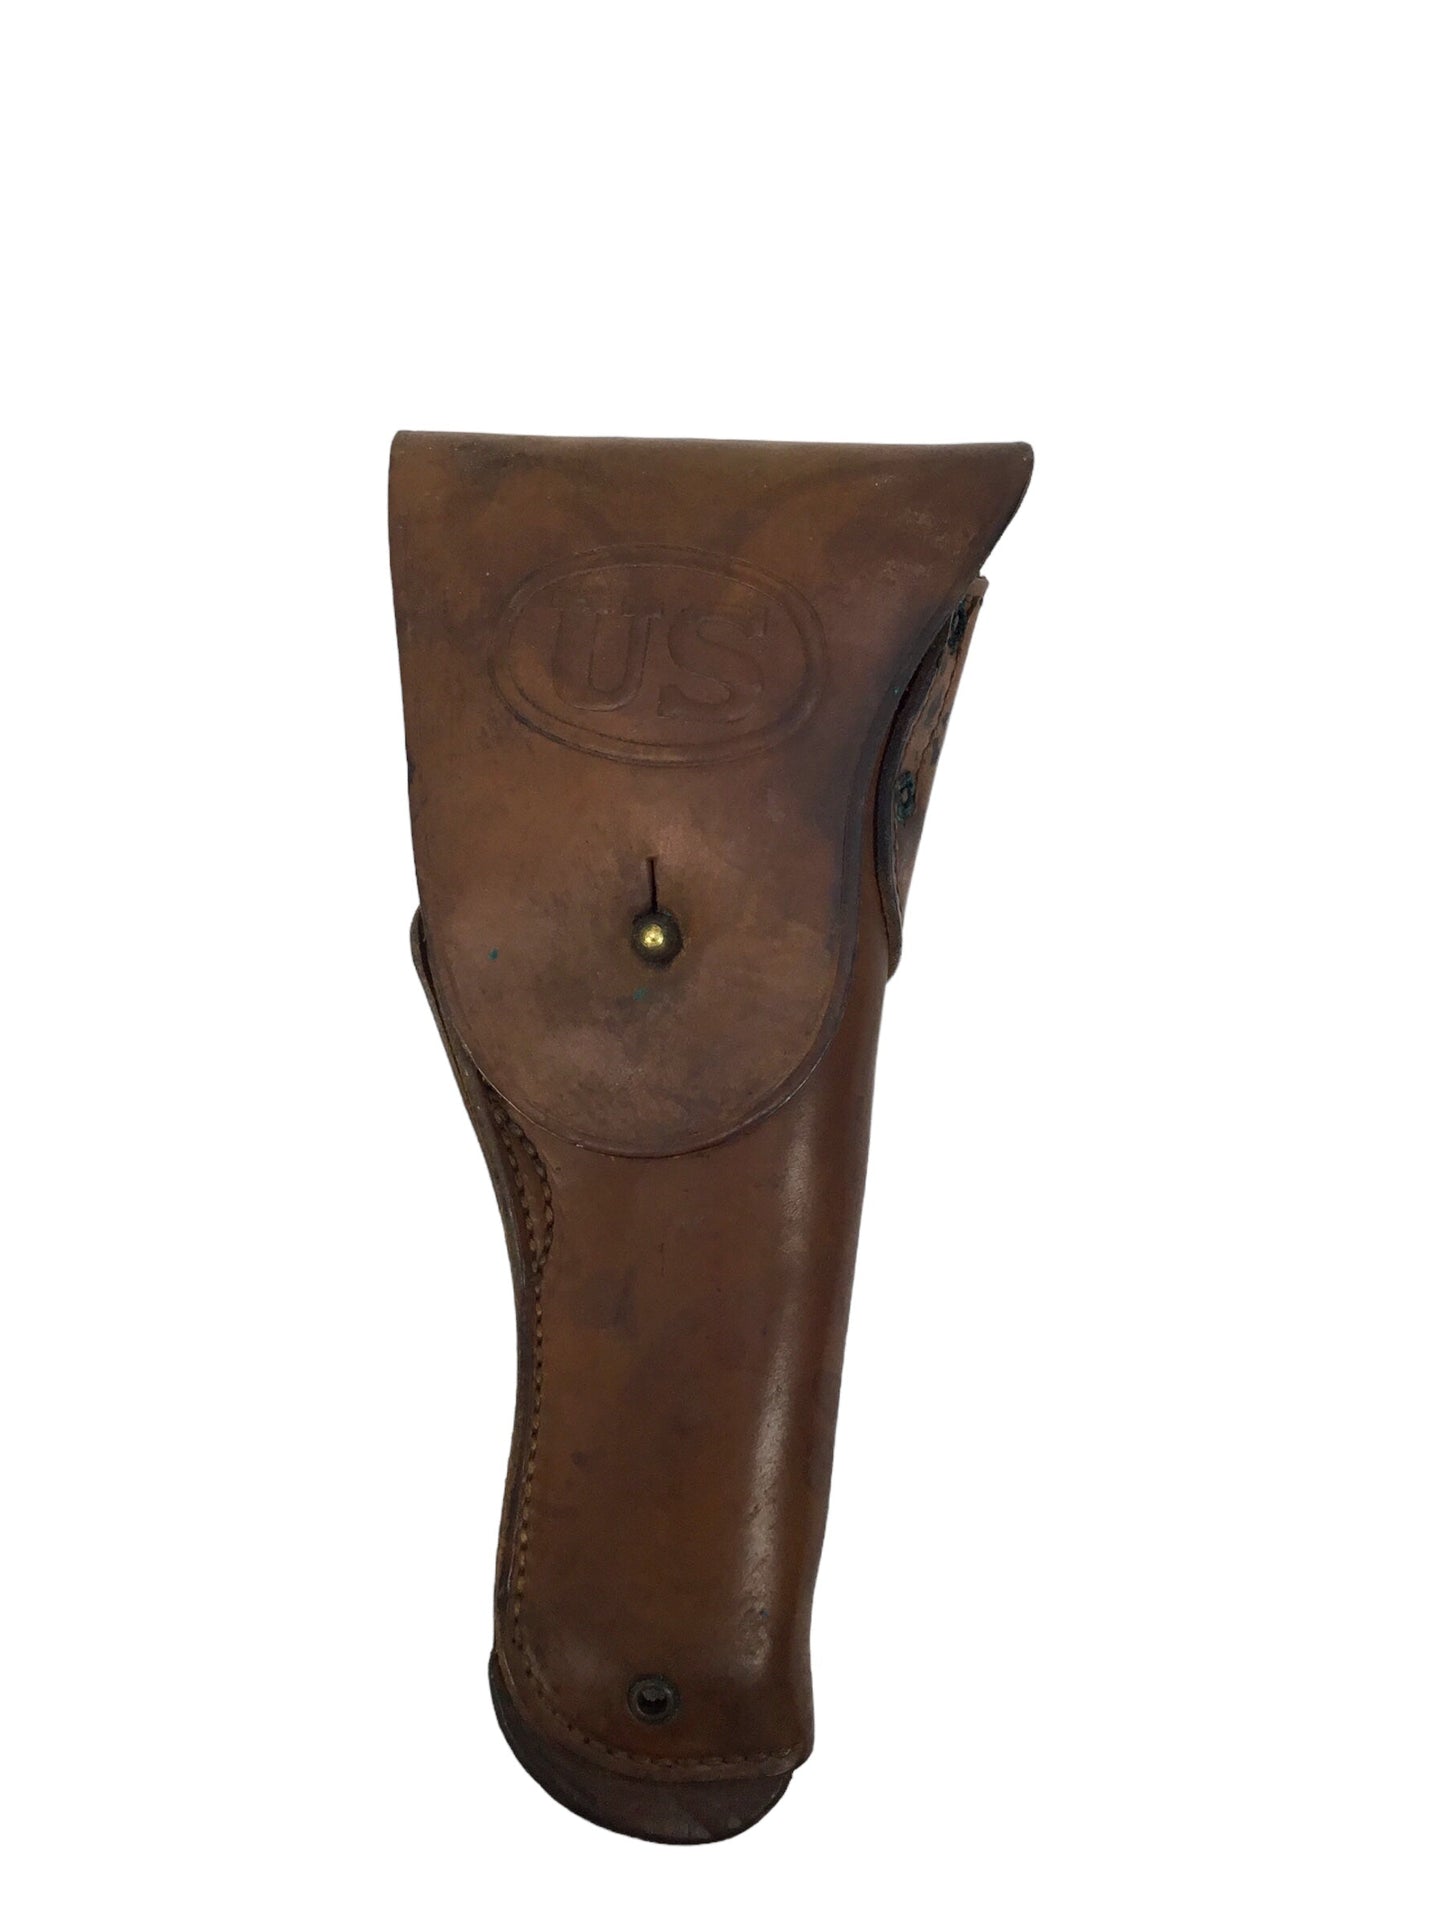 U.S. WWII leather pistol holster marked "U.S." on flap, further marked "Milwaukee Saddlery Co., 1942"